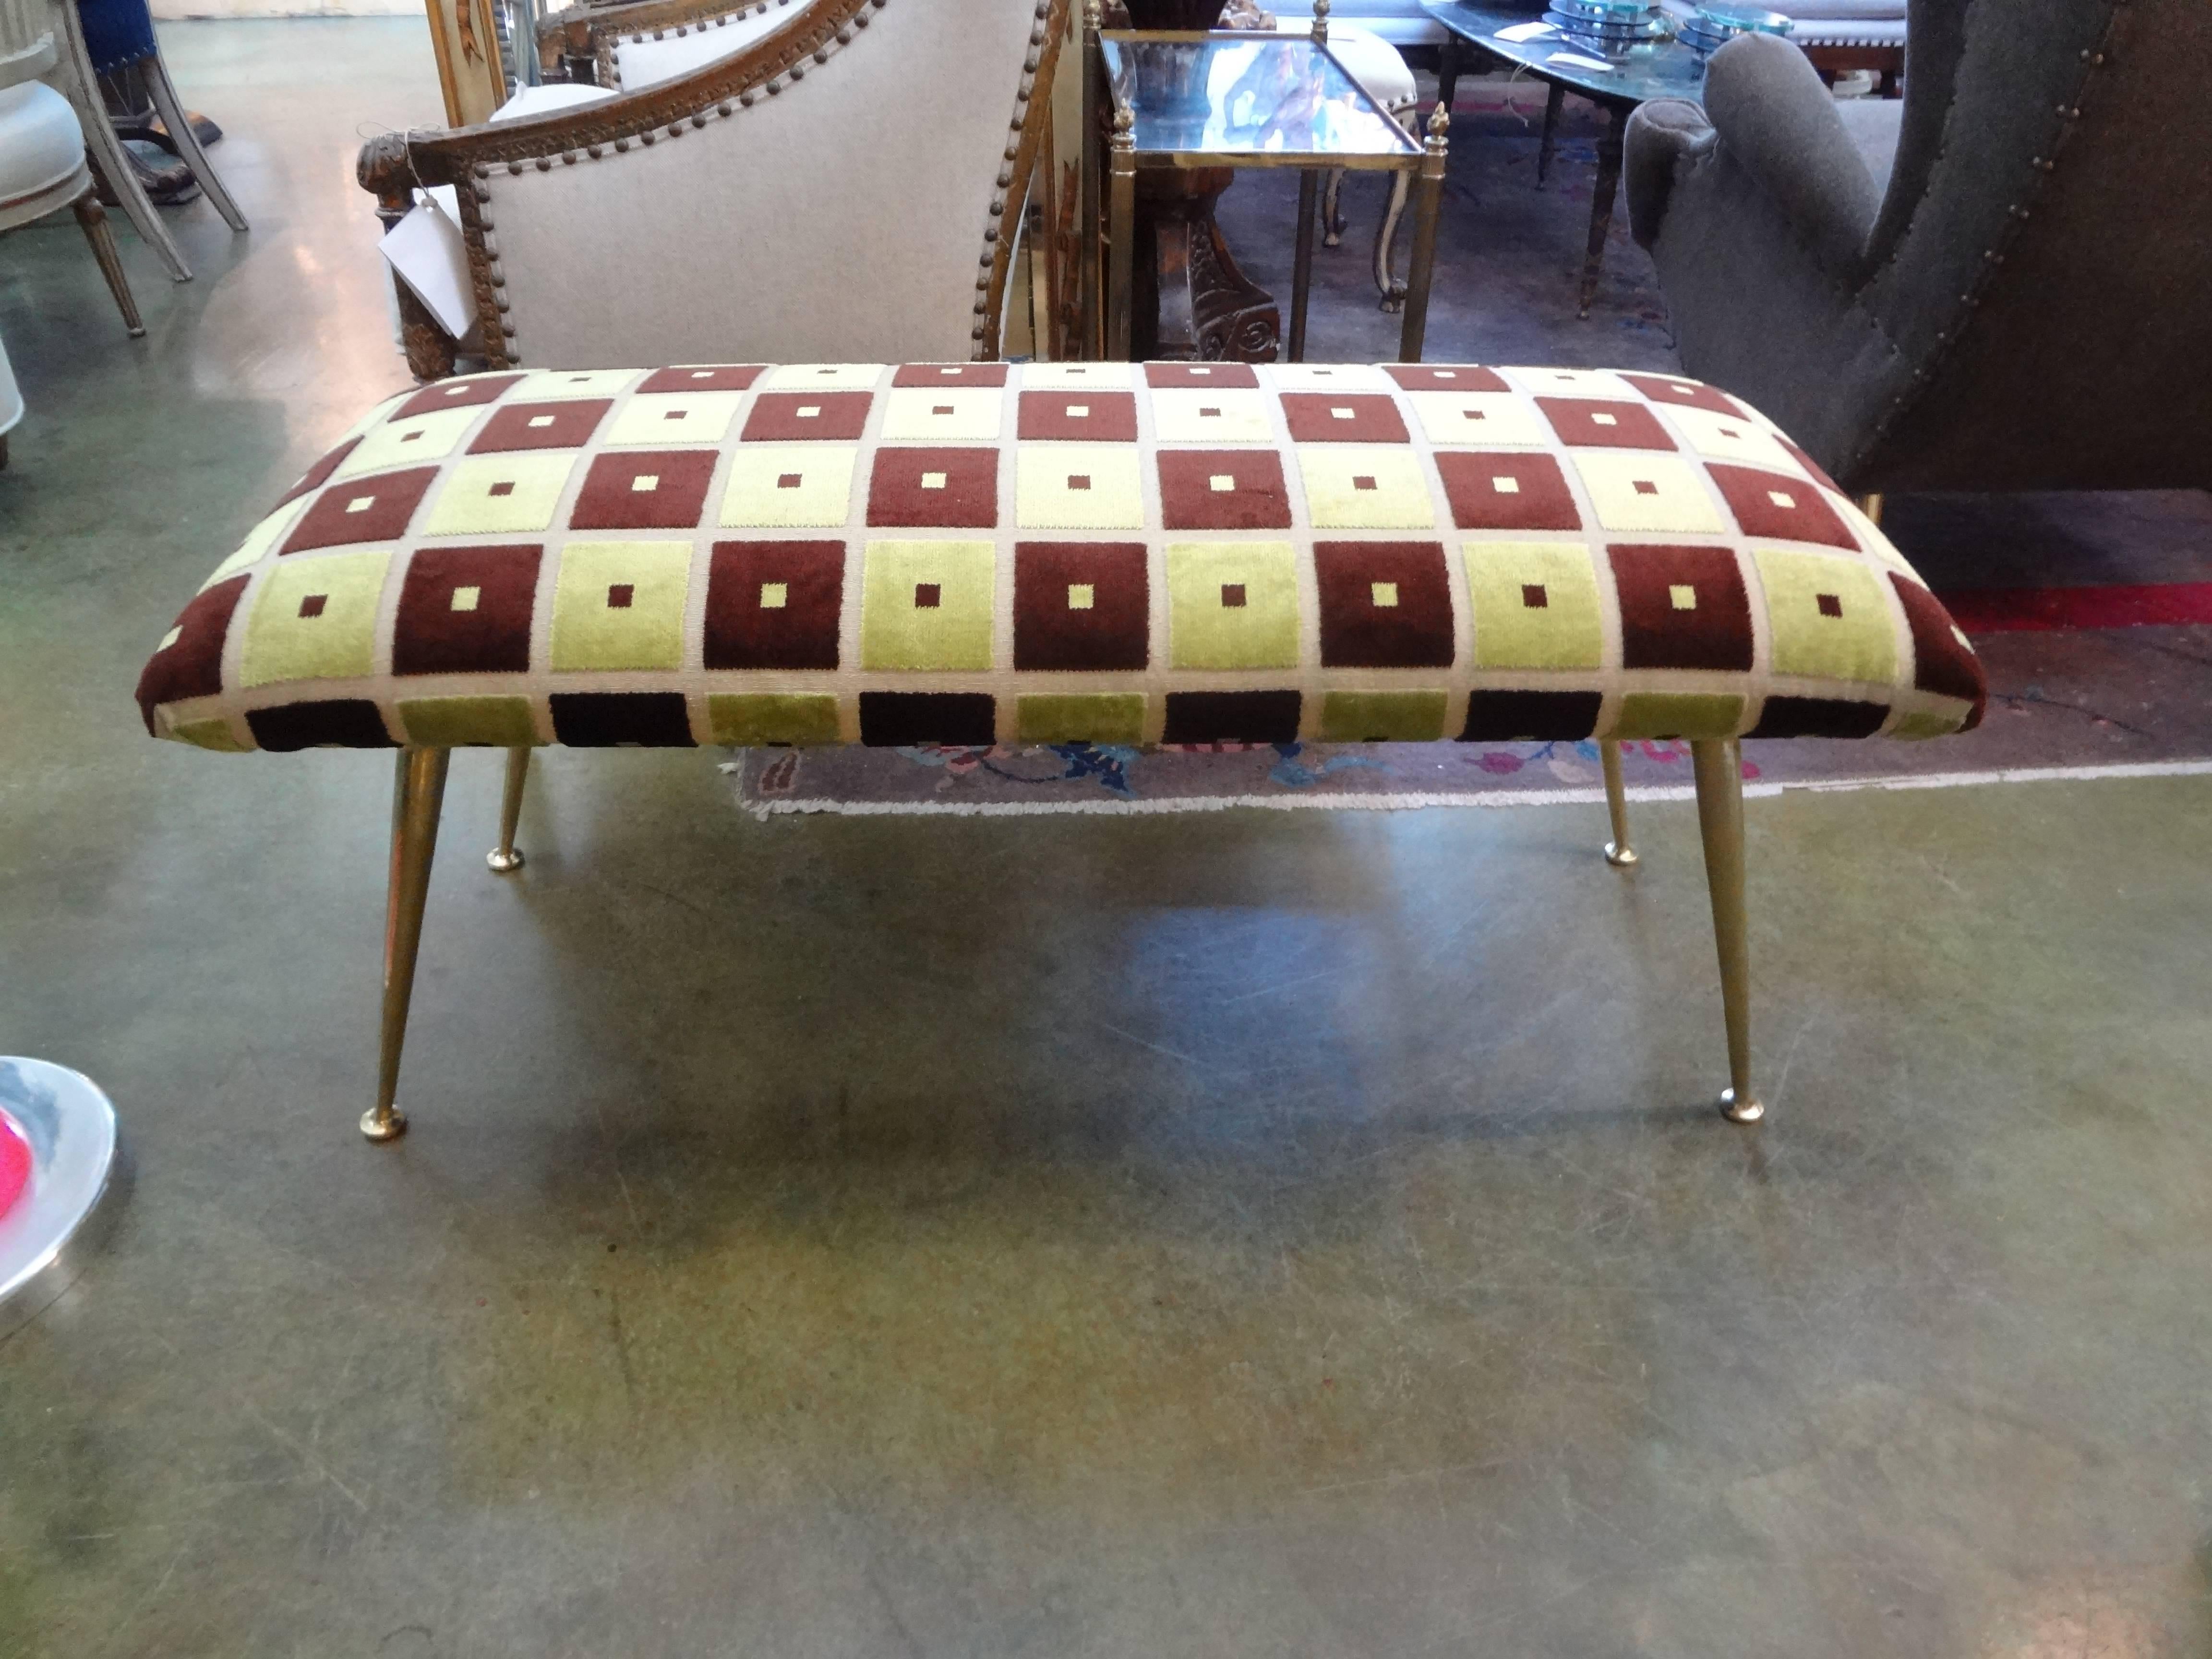 Chic Italian Mid-Century Modern brass bench with spayed legs newly upholstered in a geometric chartreuse and brown cotton velvet fabric in the style of Gio Ponti.

Please click On 